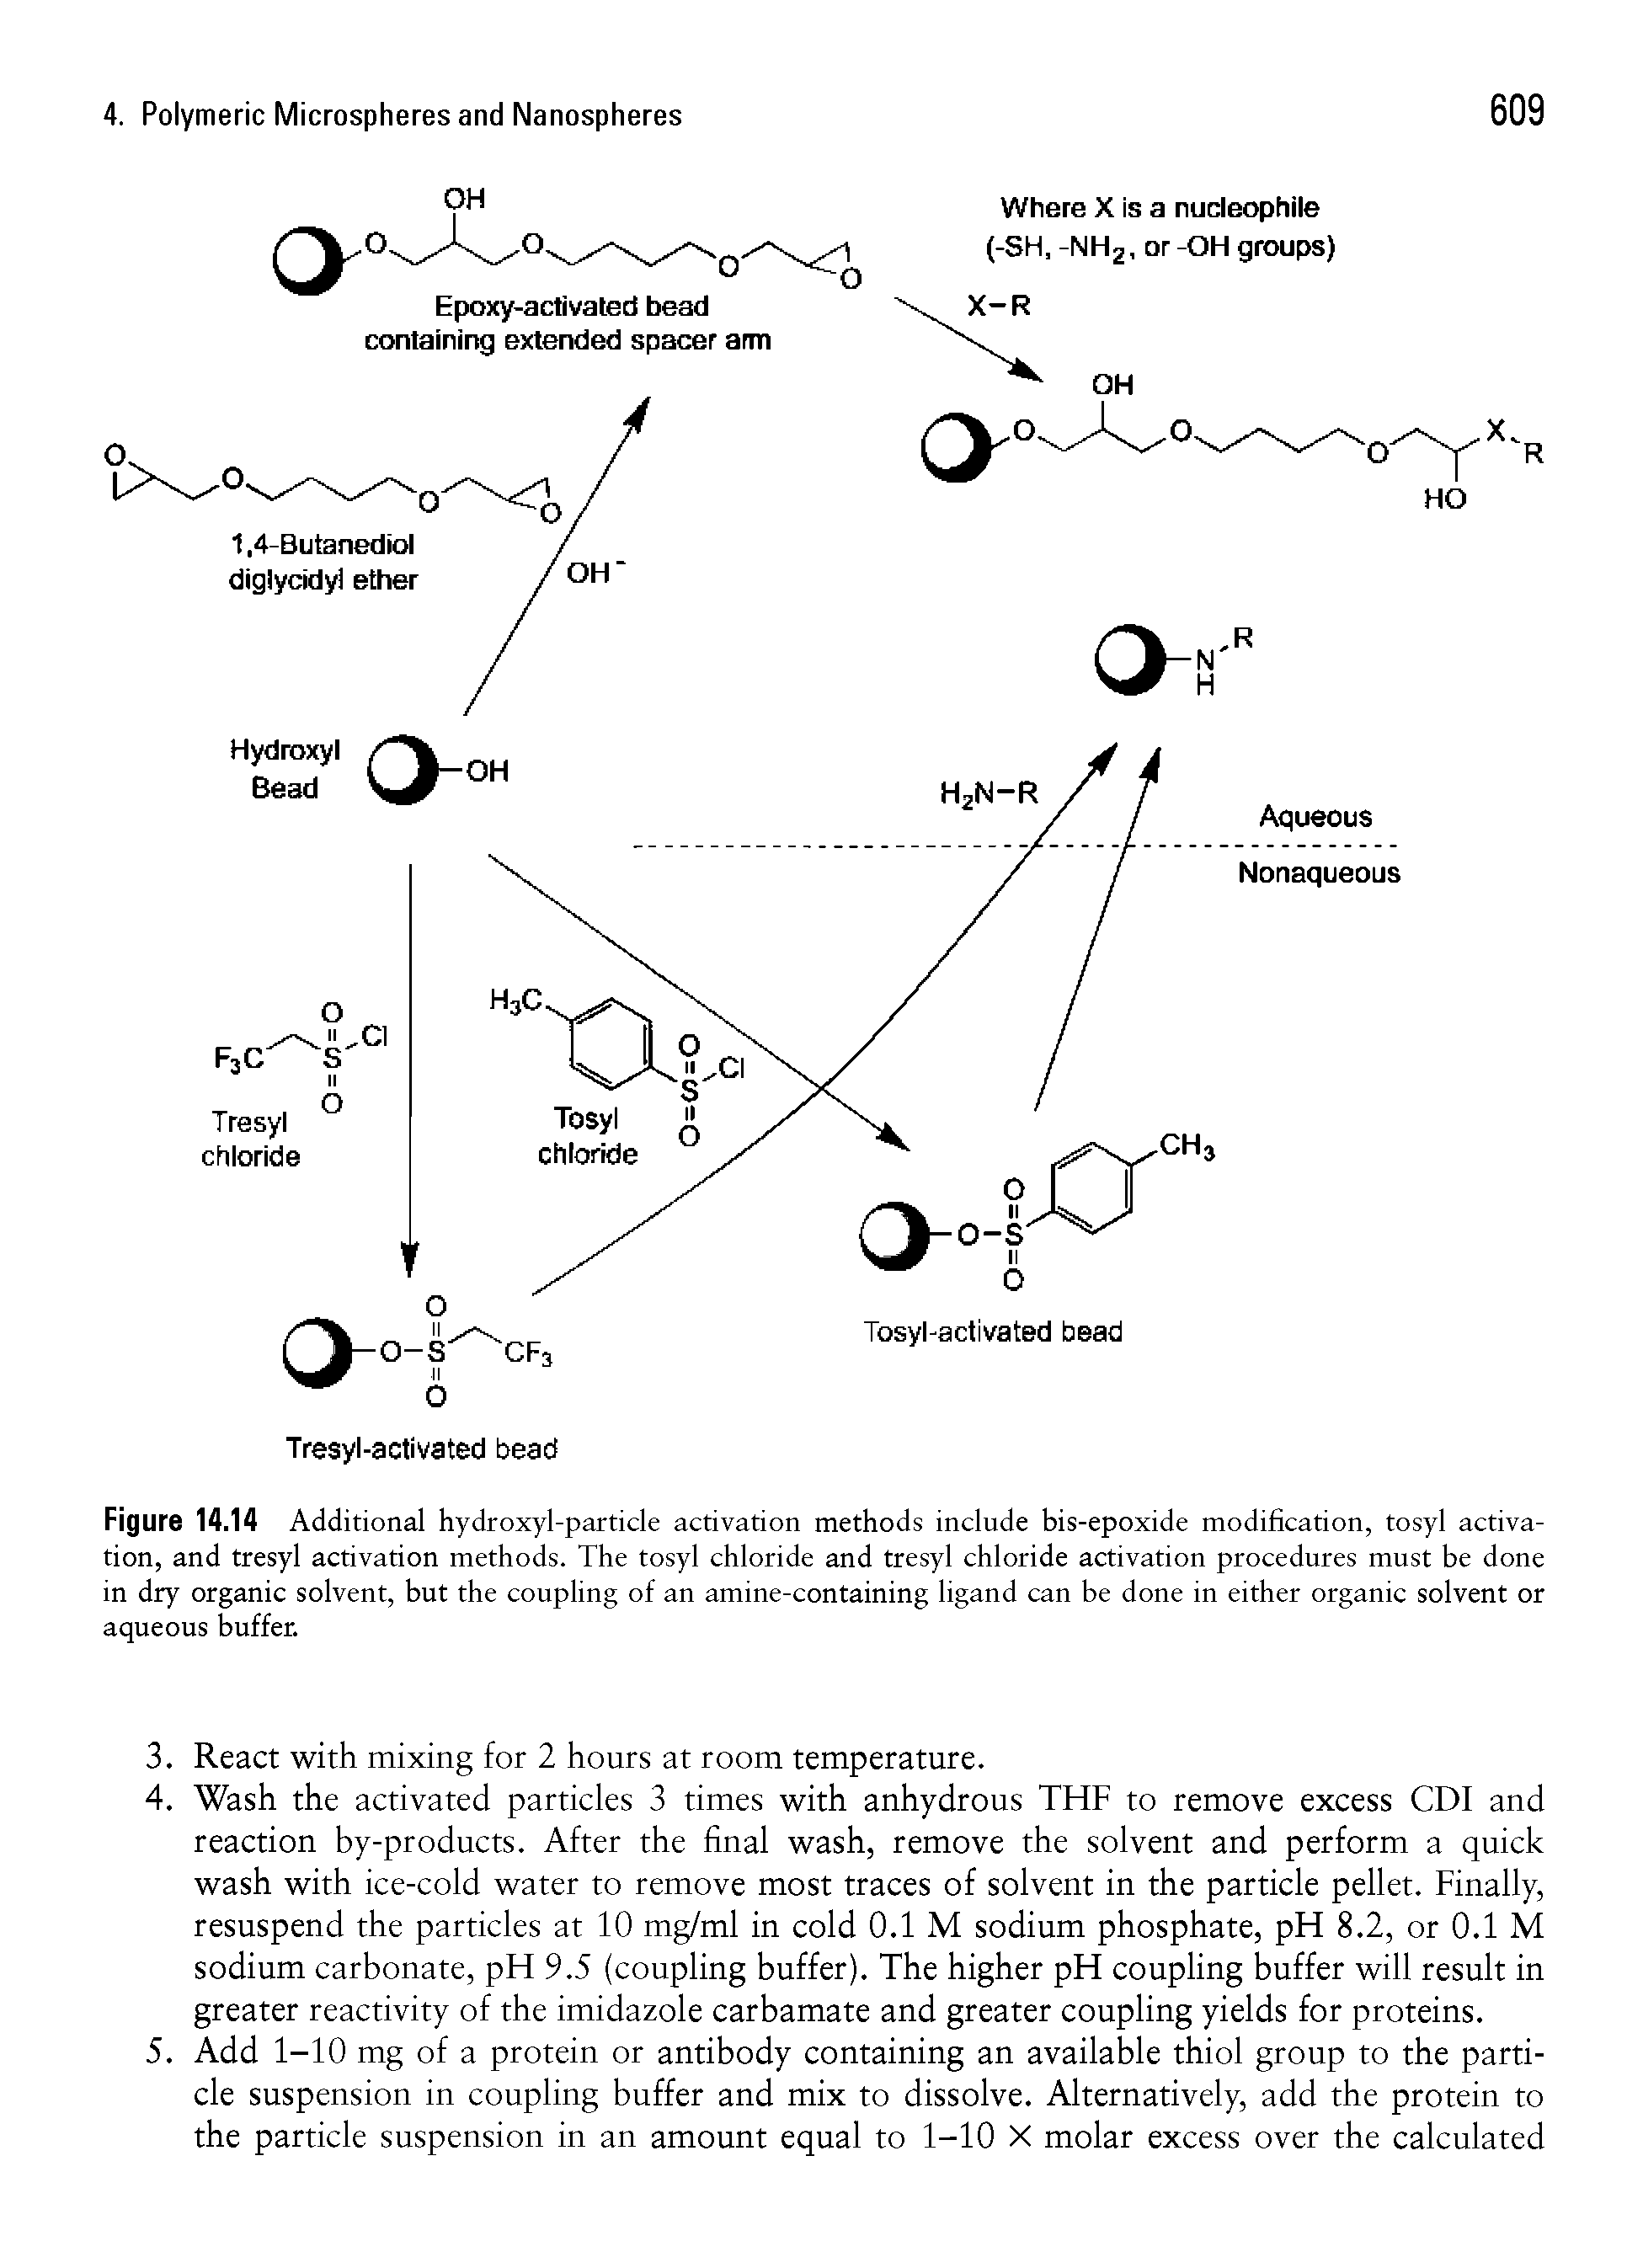 Figure 14.14 Additional hydroxyl-particle activation methods include bis-epoxide modification, tosyl activation, and tresyl activation methods. The tosyl chloride and tresyl chloride activation procedures must be done in dry organic solvent, but the coupling of an amine-containing ligand can be done in either organic solvent or aqueous buffer.